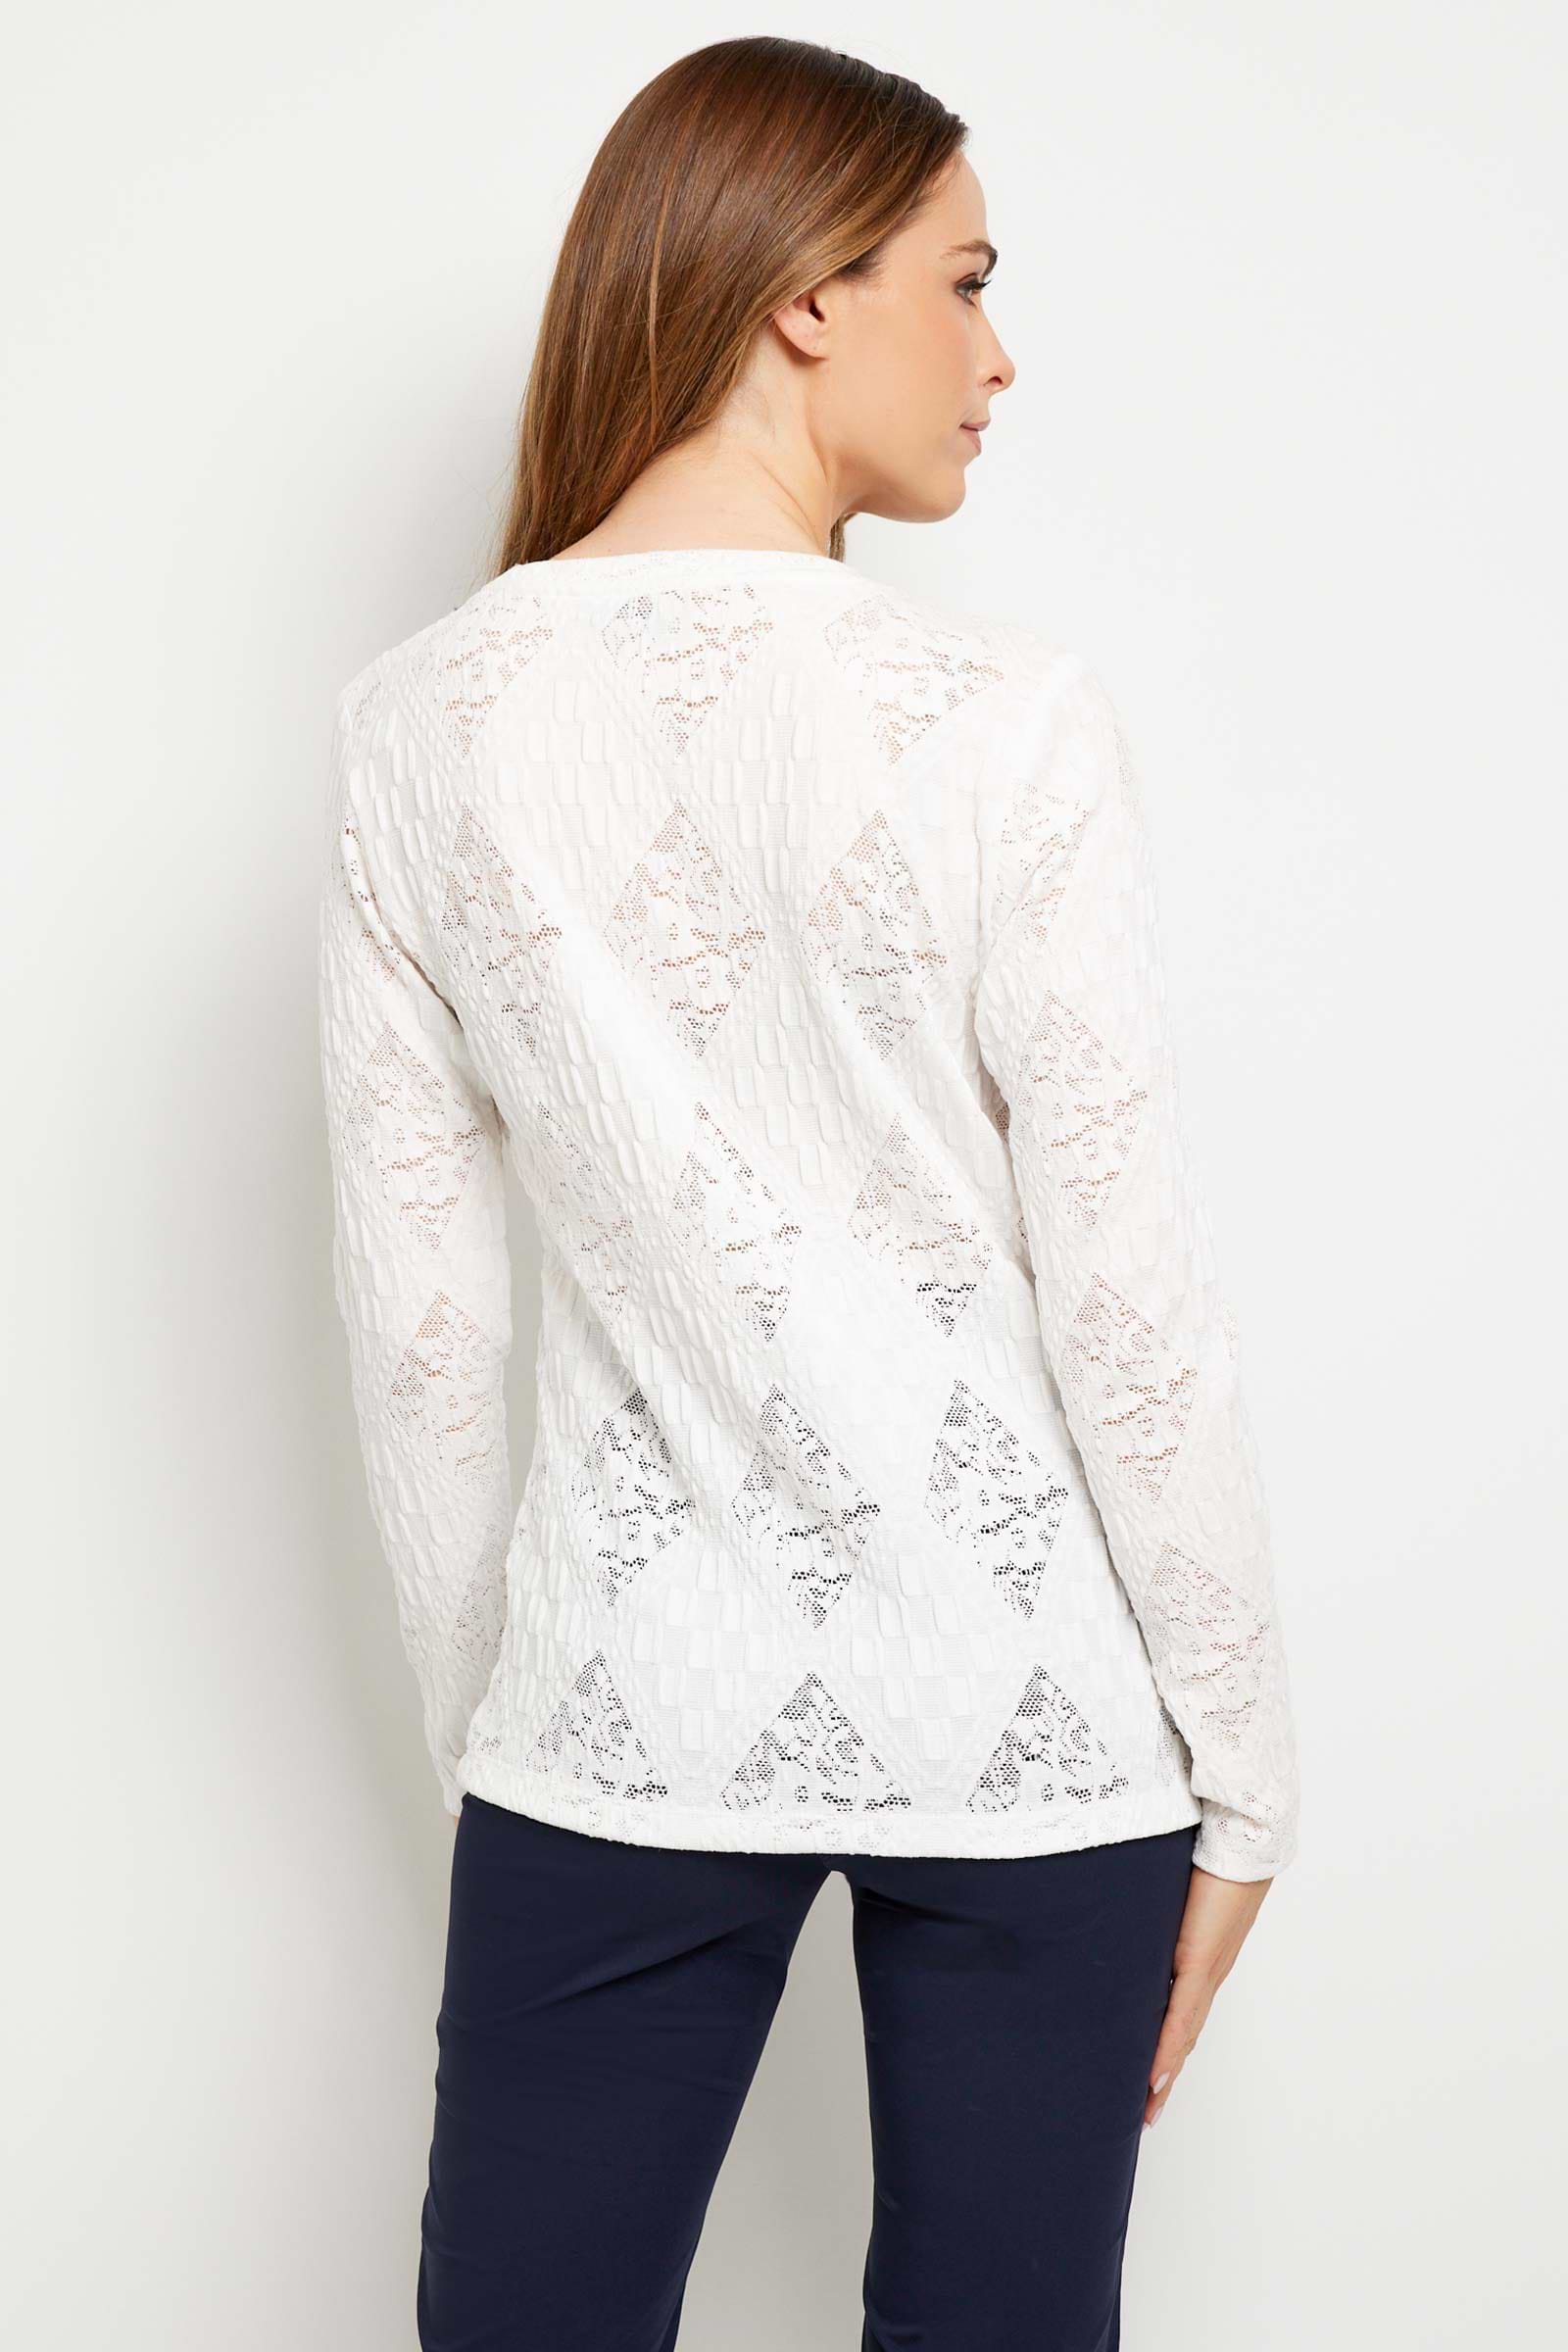 The Best Travel Top. Woman Showing the Back Profile of a Lace Juliana Top in White.